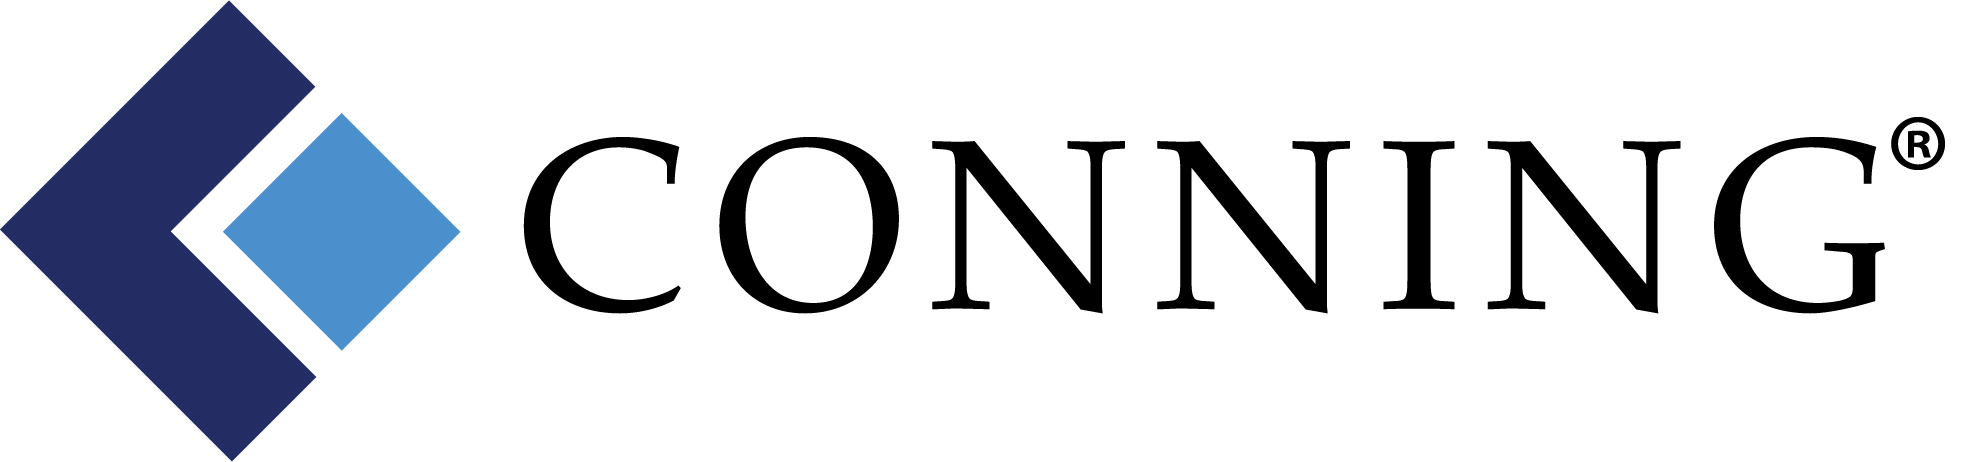 Conning 3 color logo with r final 2017.jpg